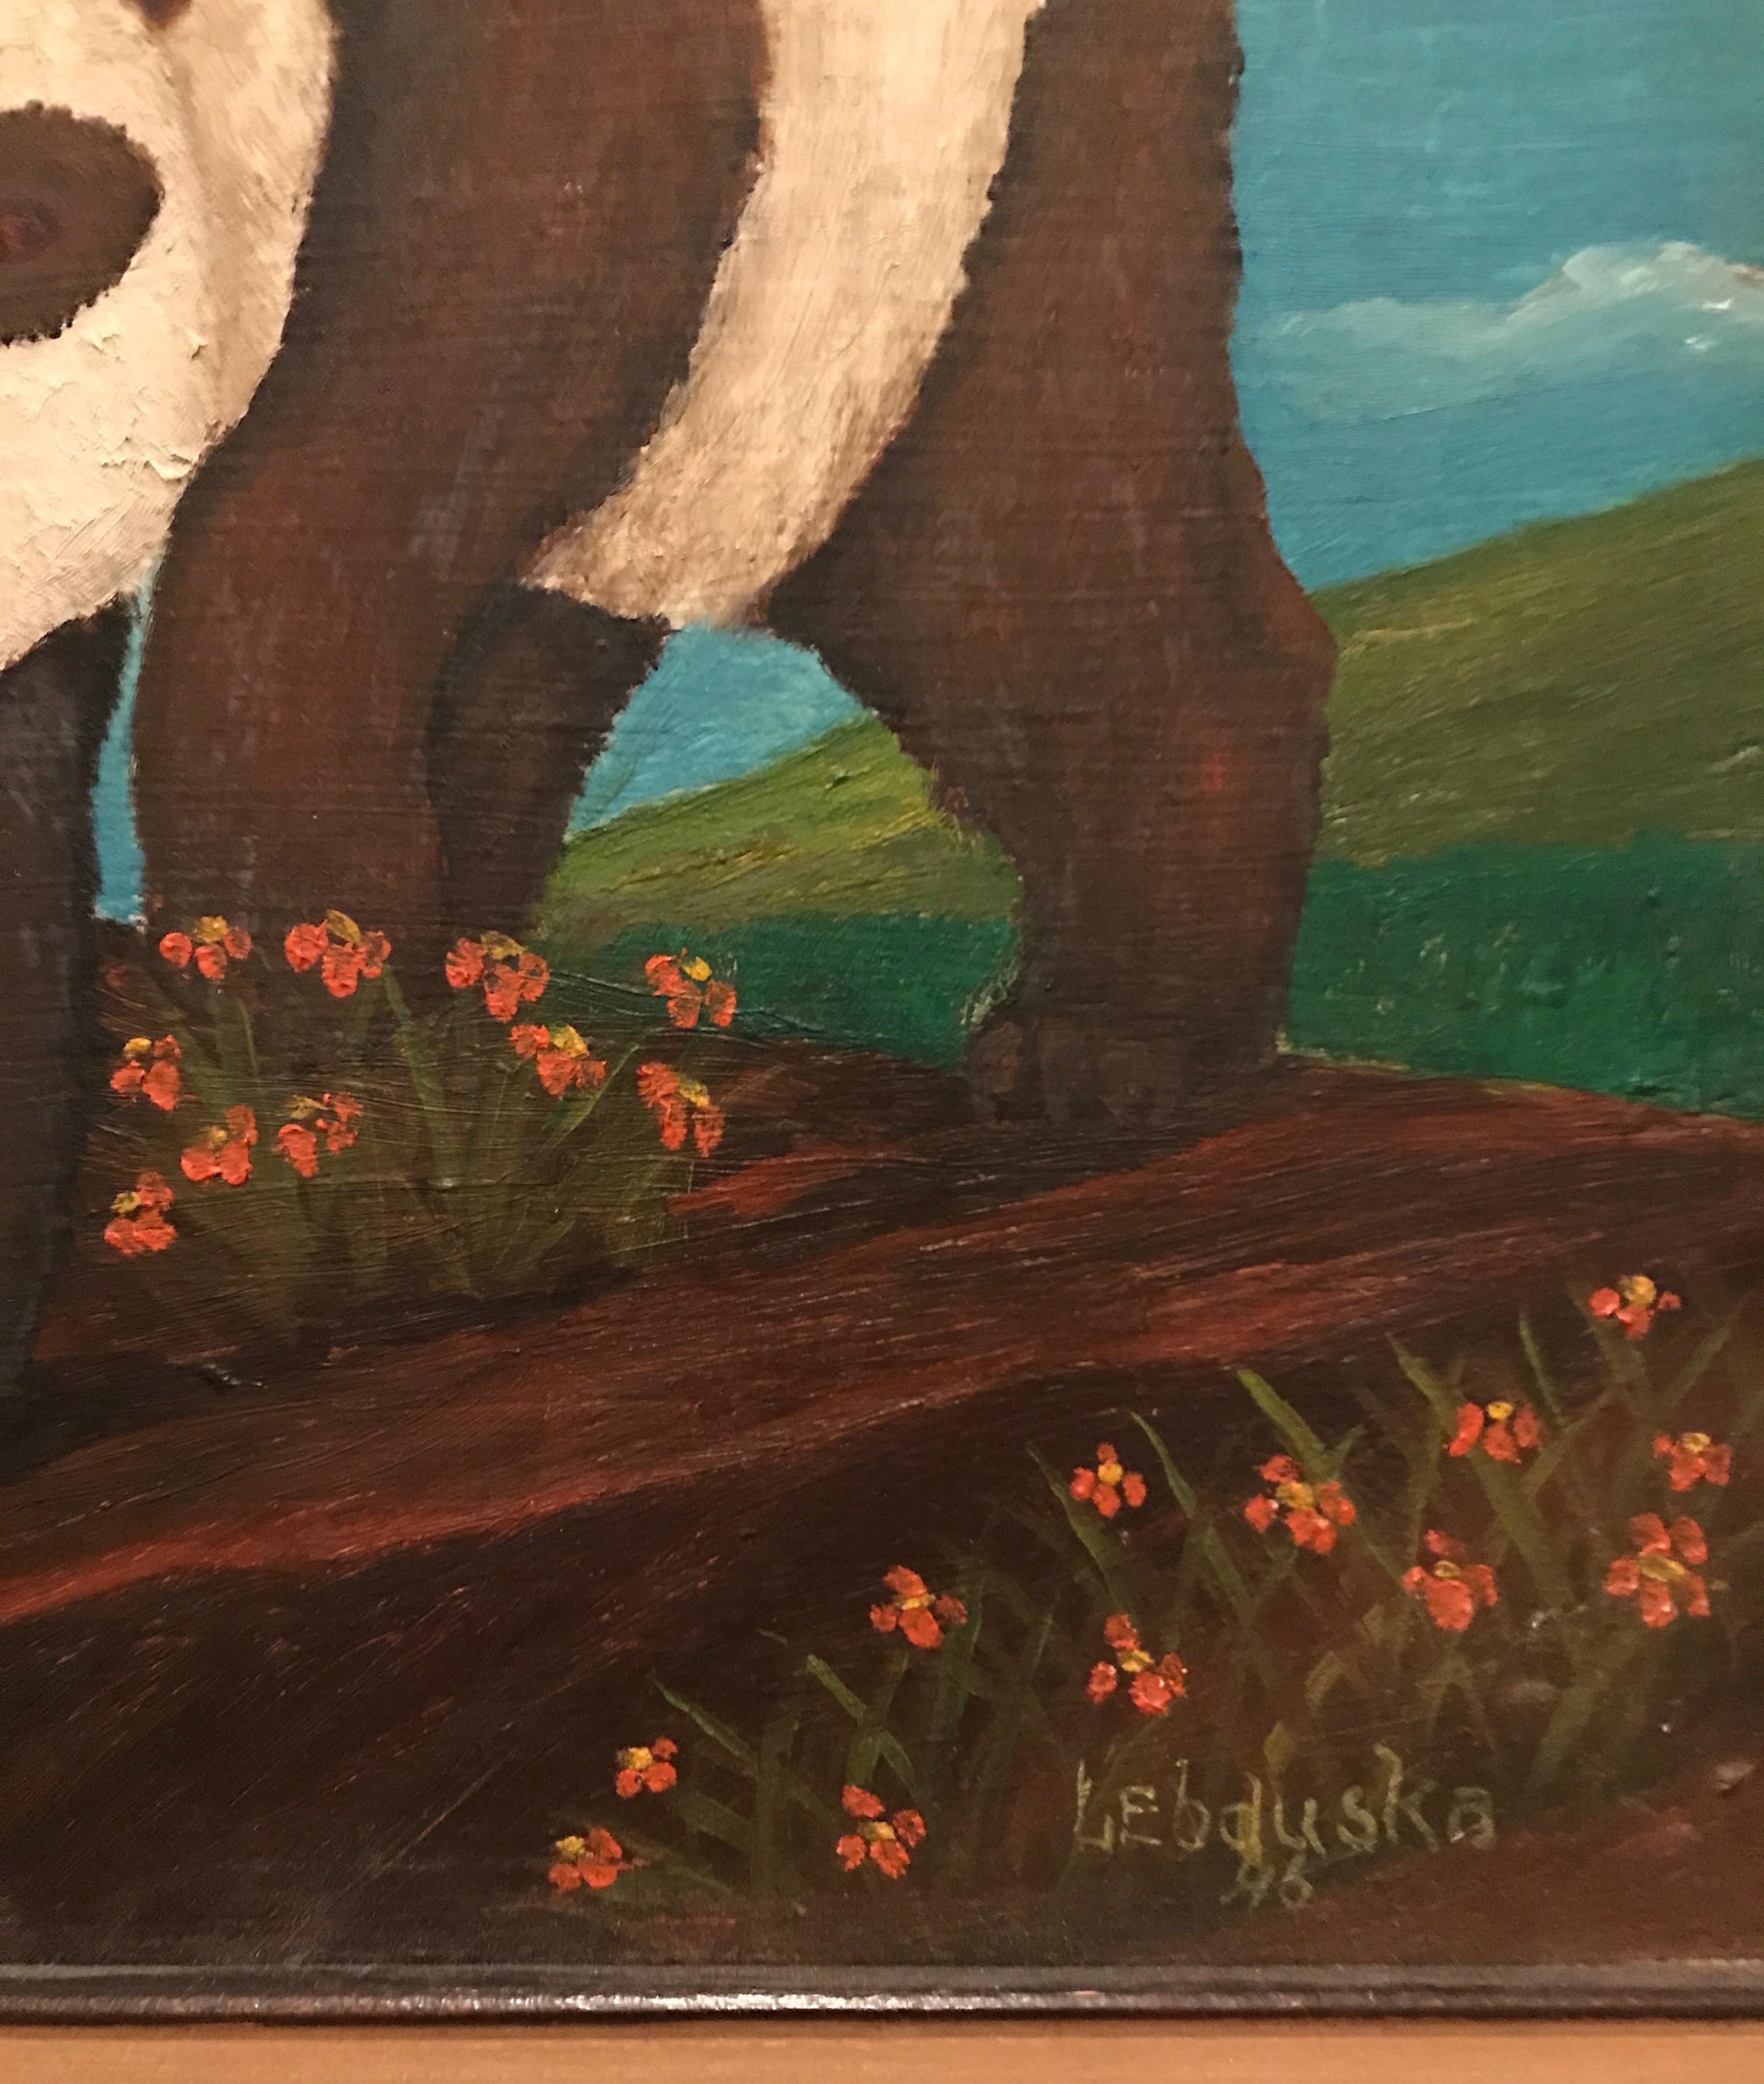 Original small oil painting of panda bear traversing flowering landscape. The size of image is 11.5 x 11.5.